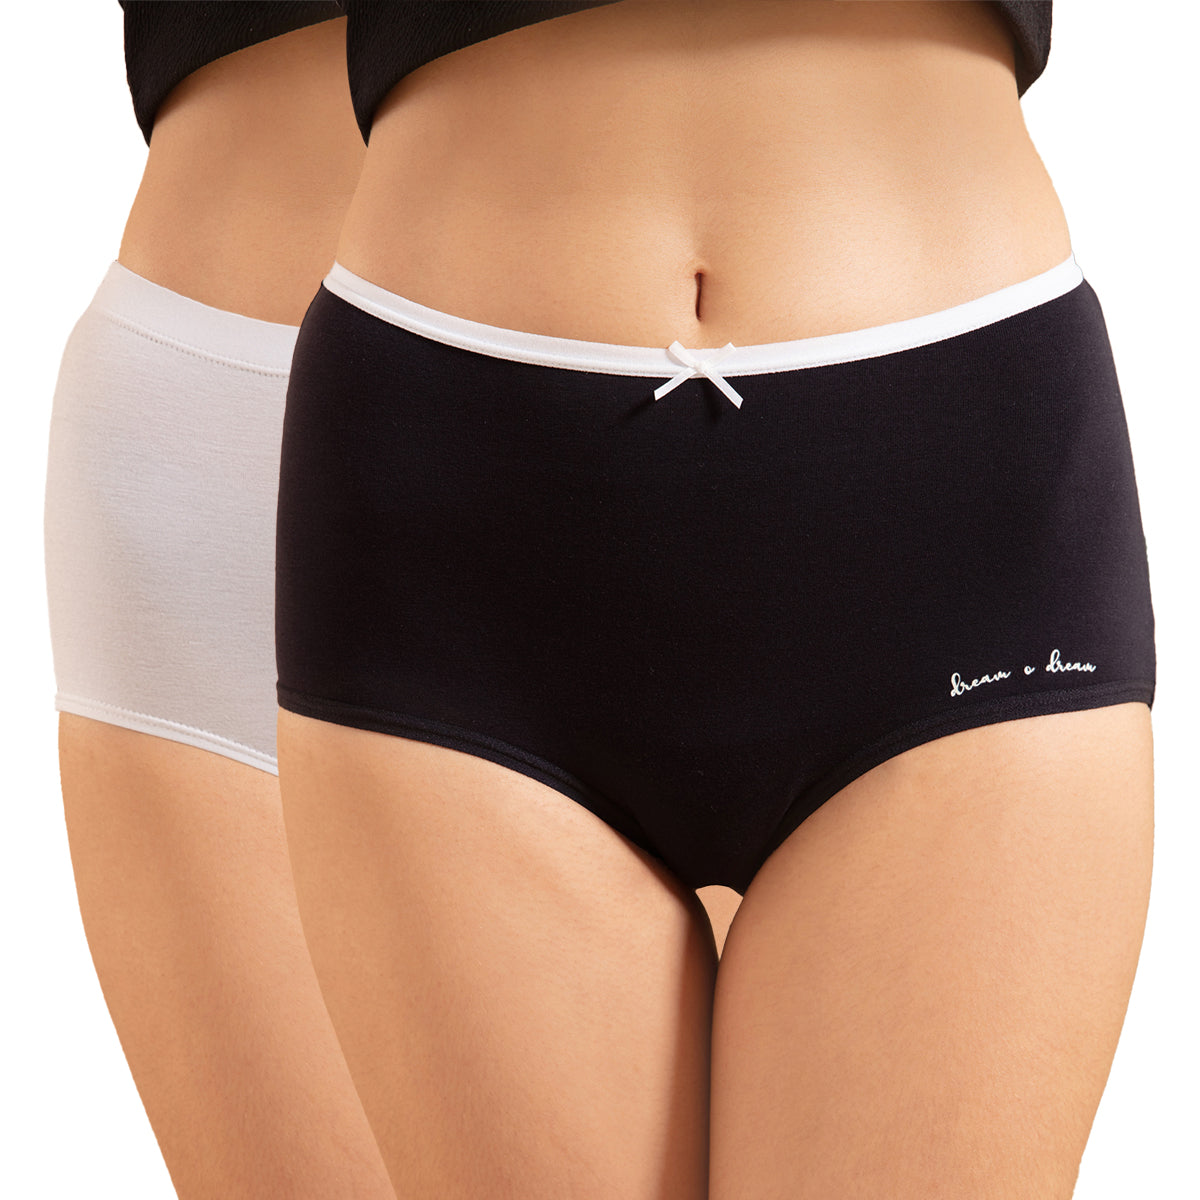 NYKD X Masaba Pack Of 2 Cotton Full Brief with Anti odor-NYP012--Anthracite, White